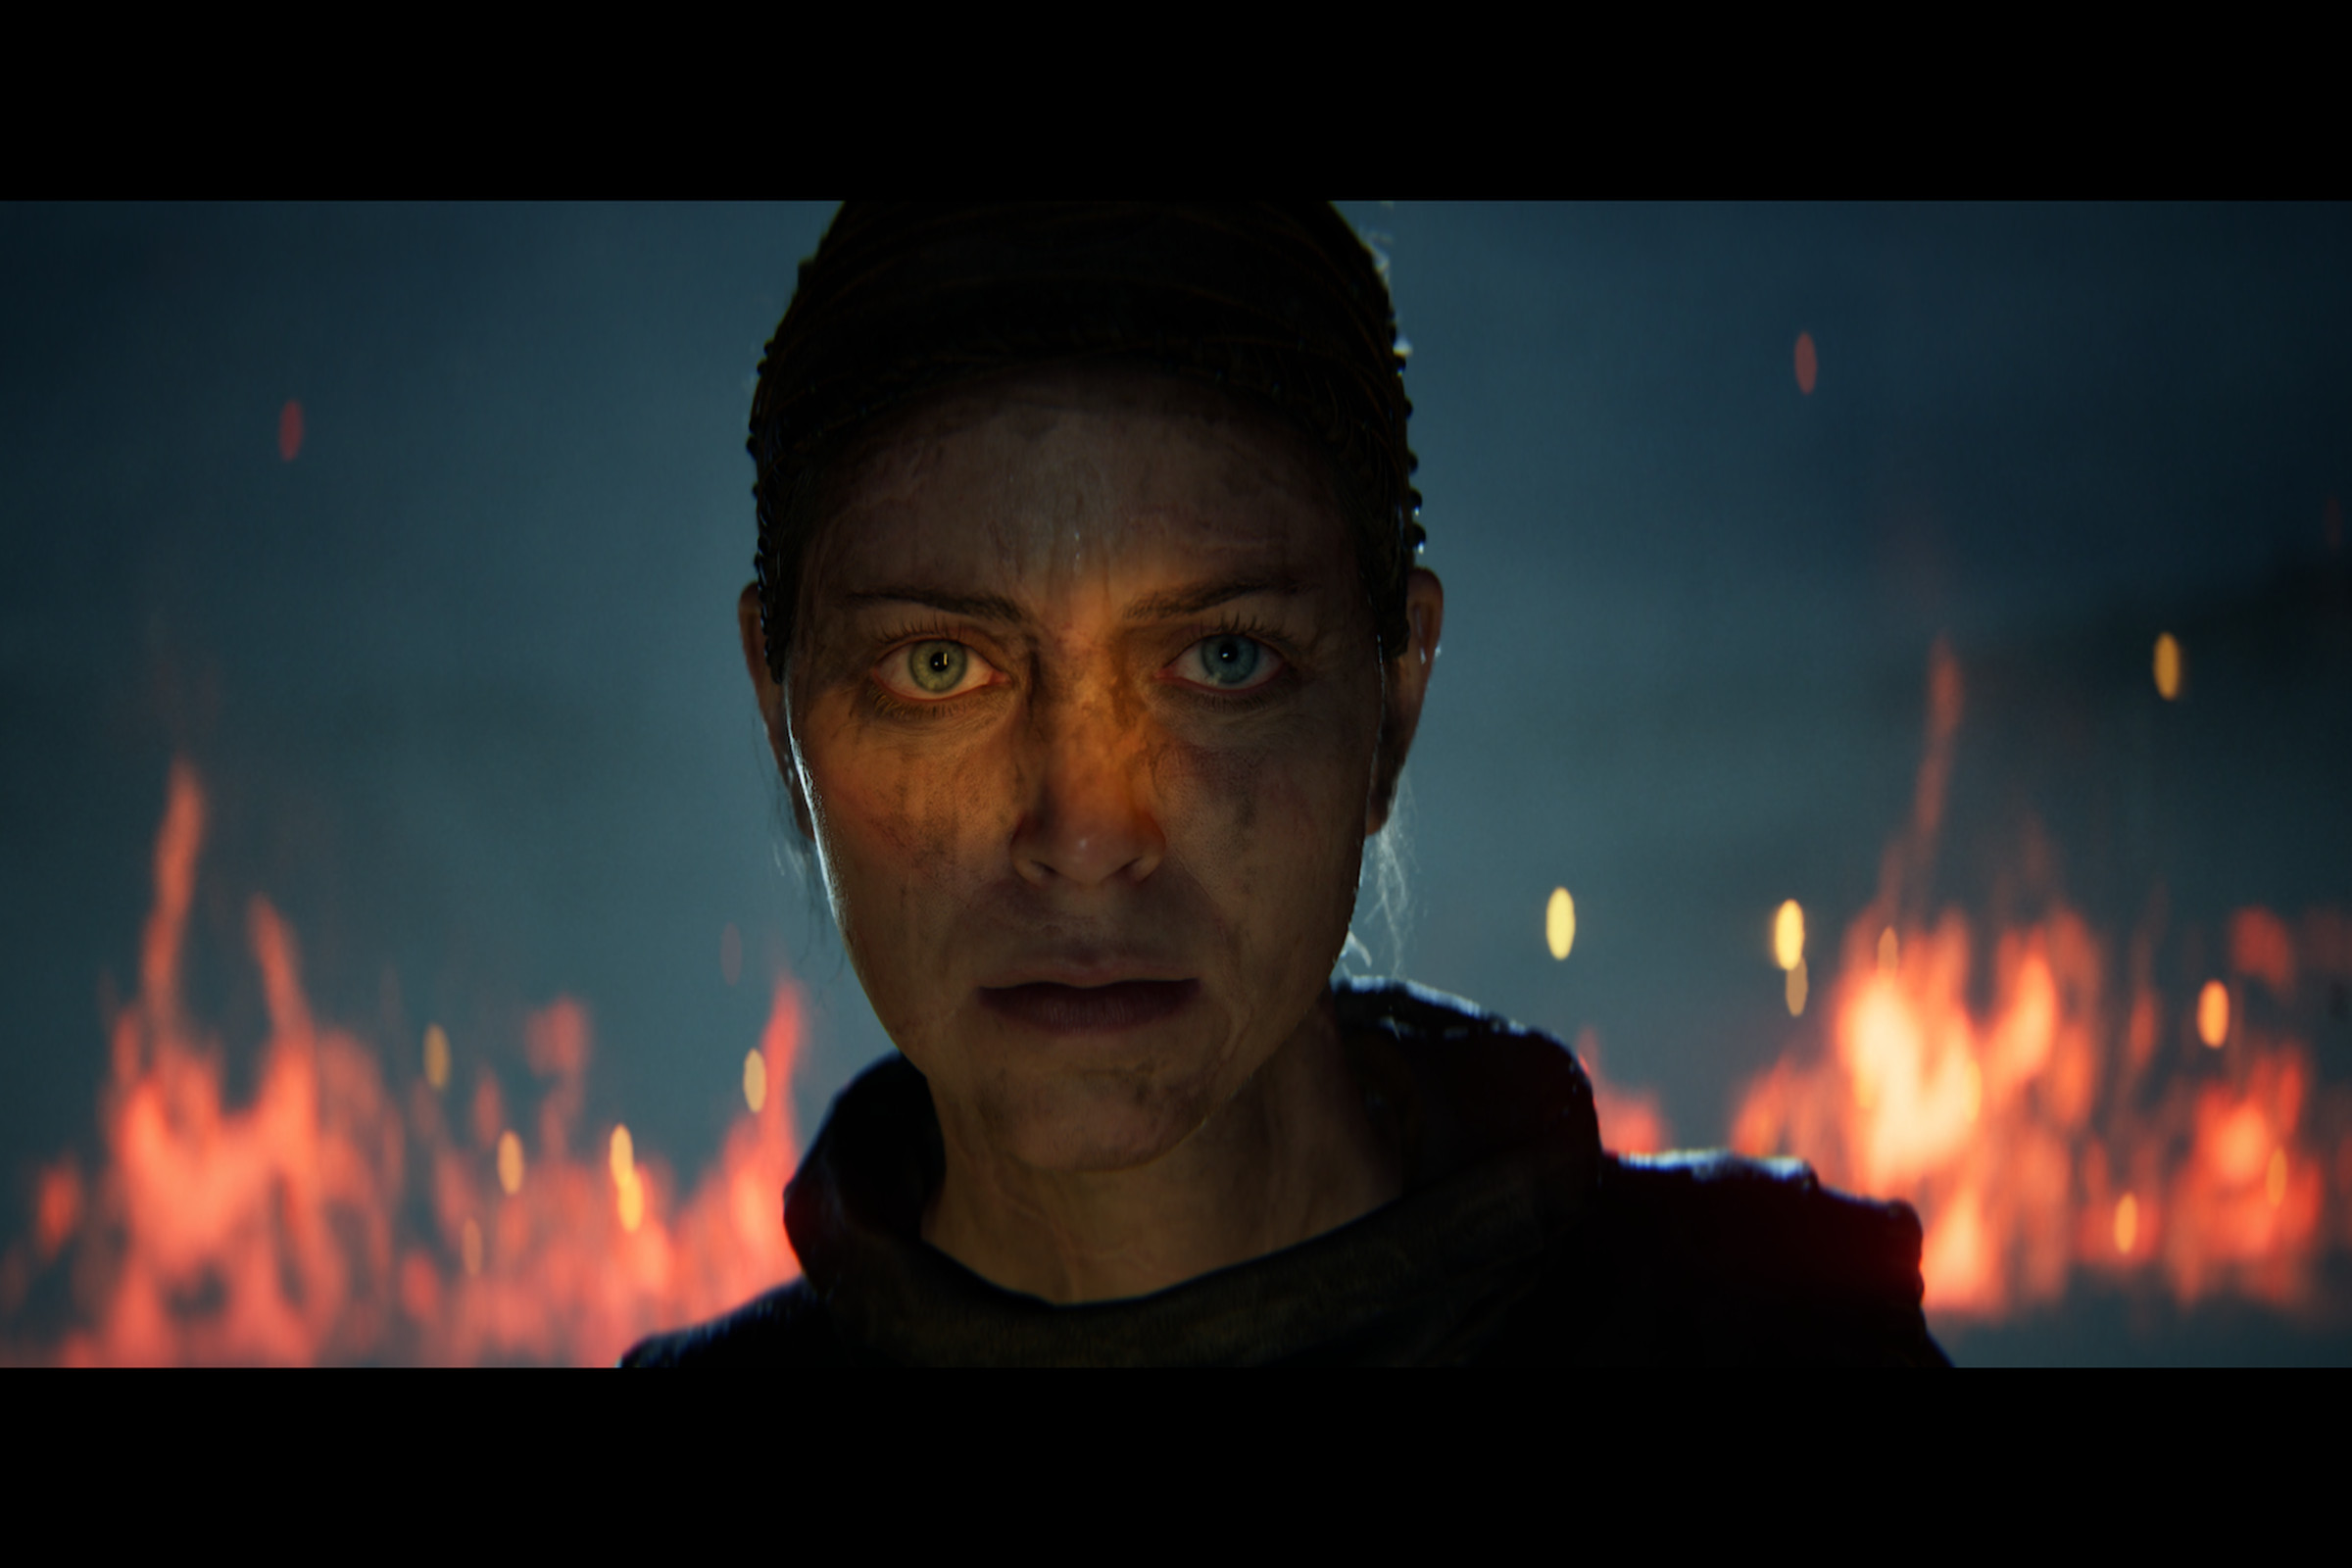 Screenshot from Senua’s Saga: Hellblade II featuring a close up shot of Senua, a woman covered in grime with flames burning behind her.